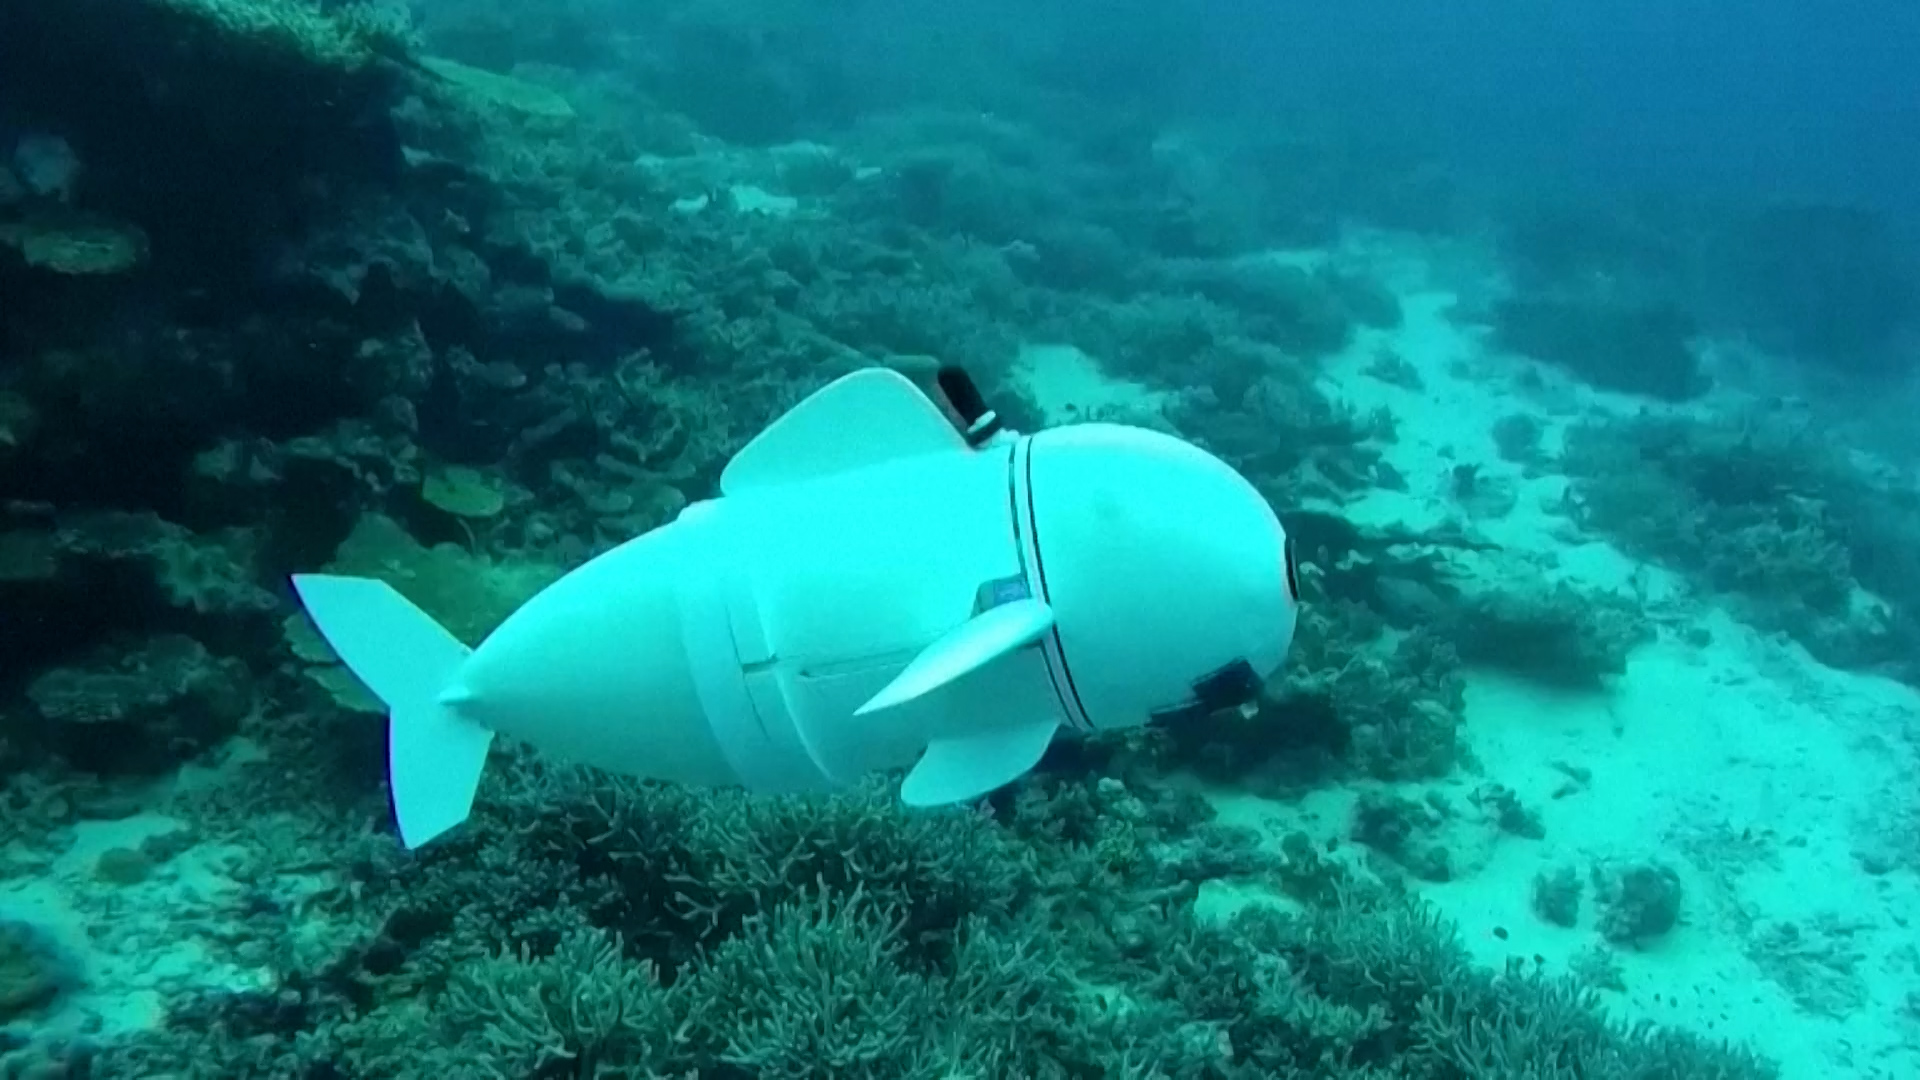 Robotic fish collects DNA samples in the ocean